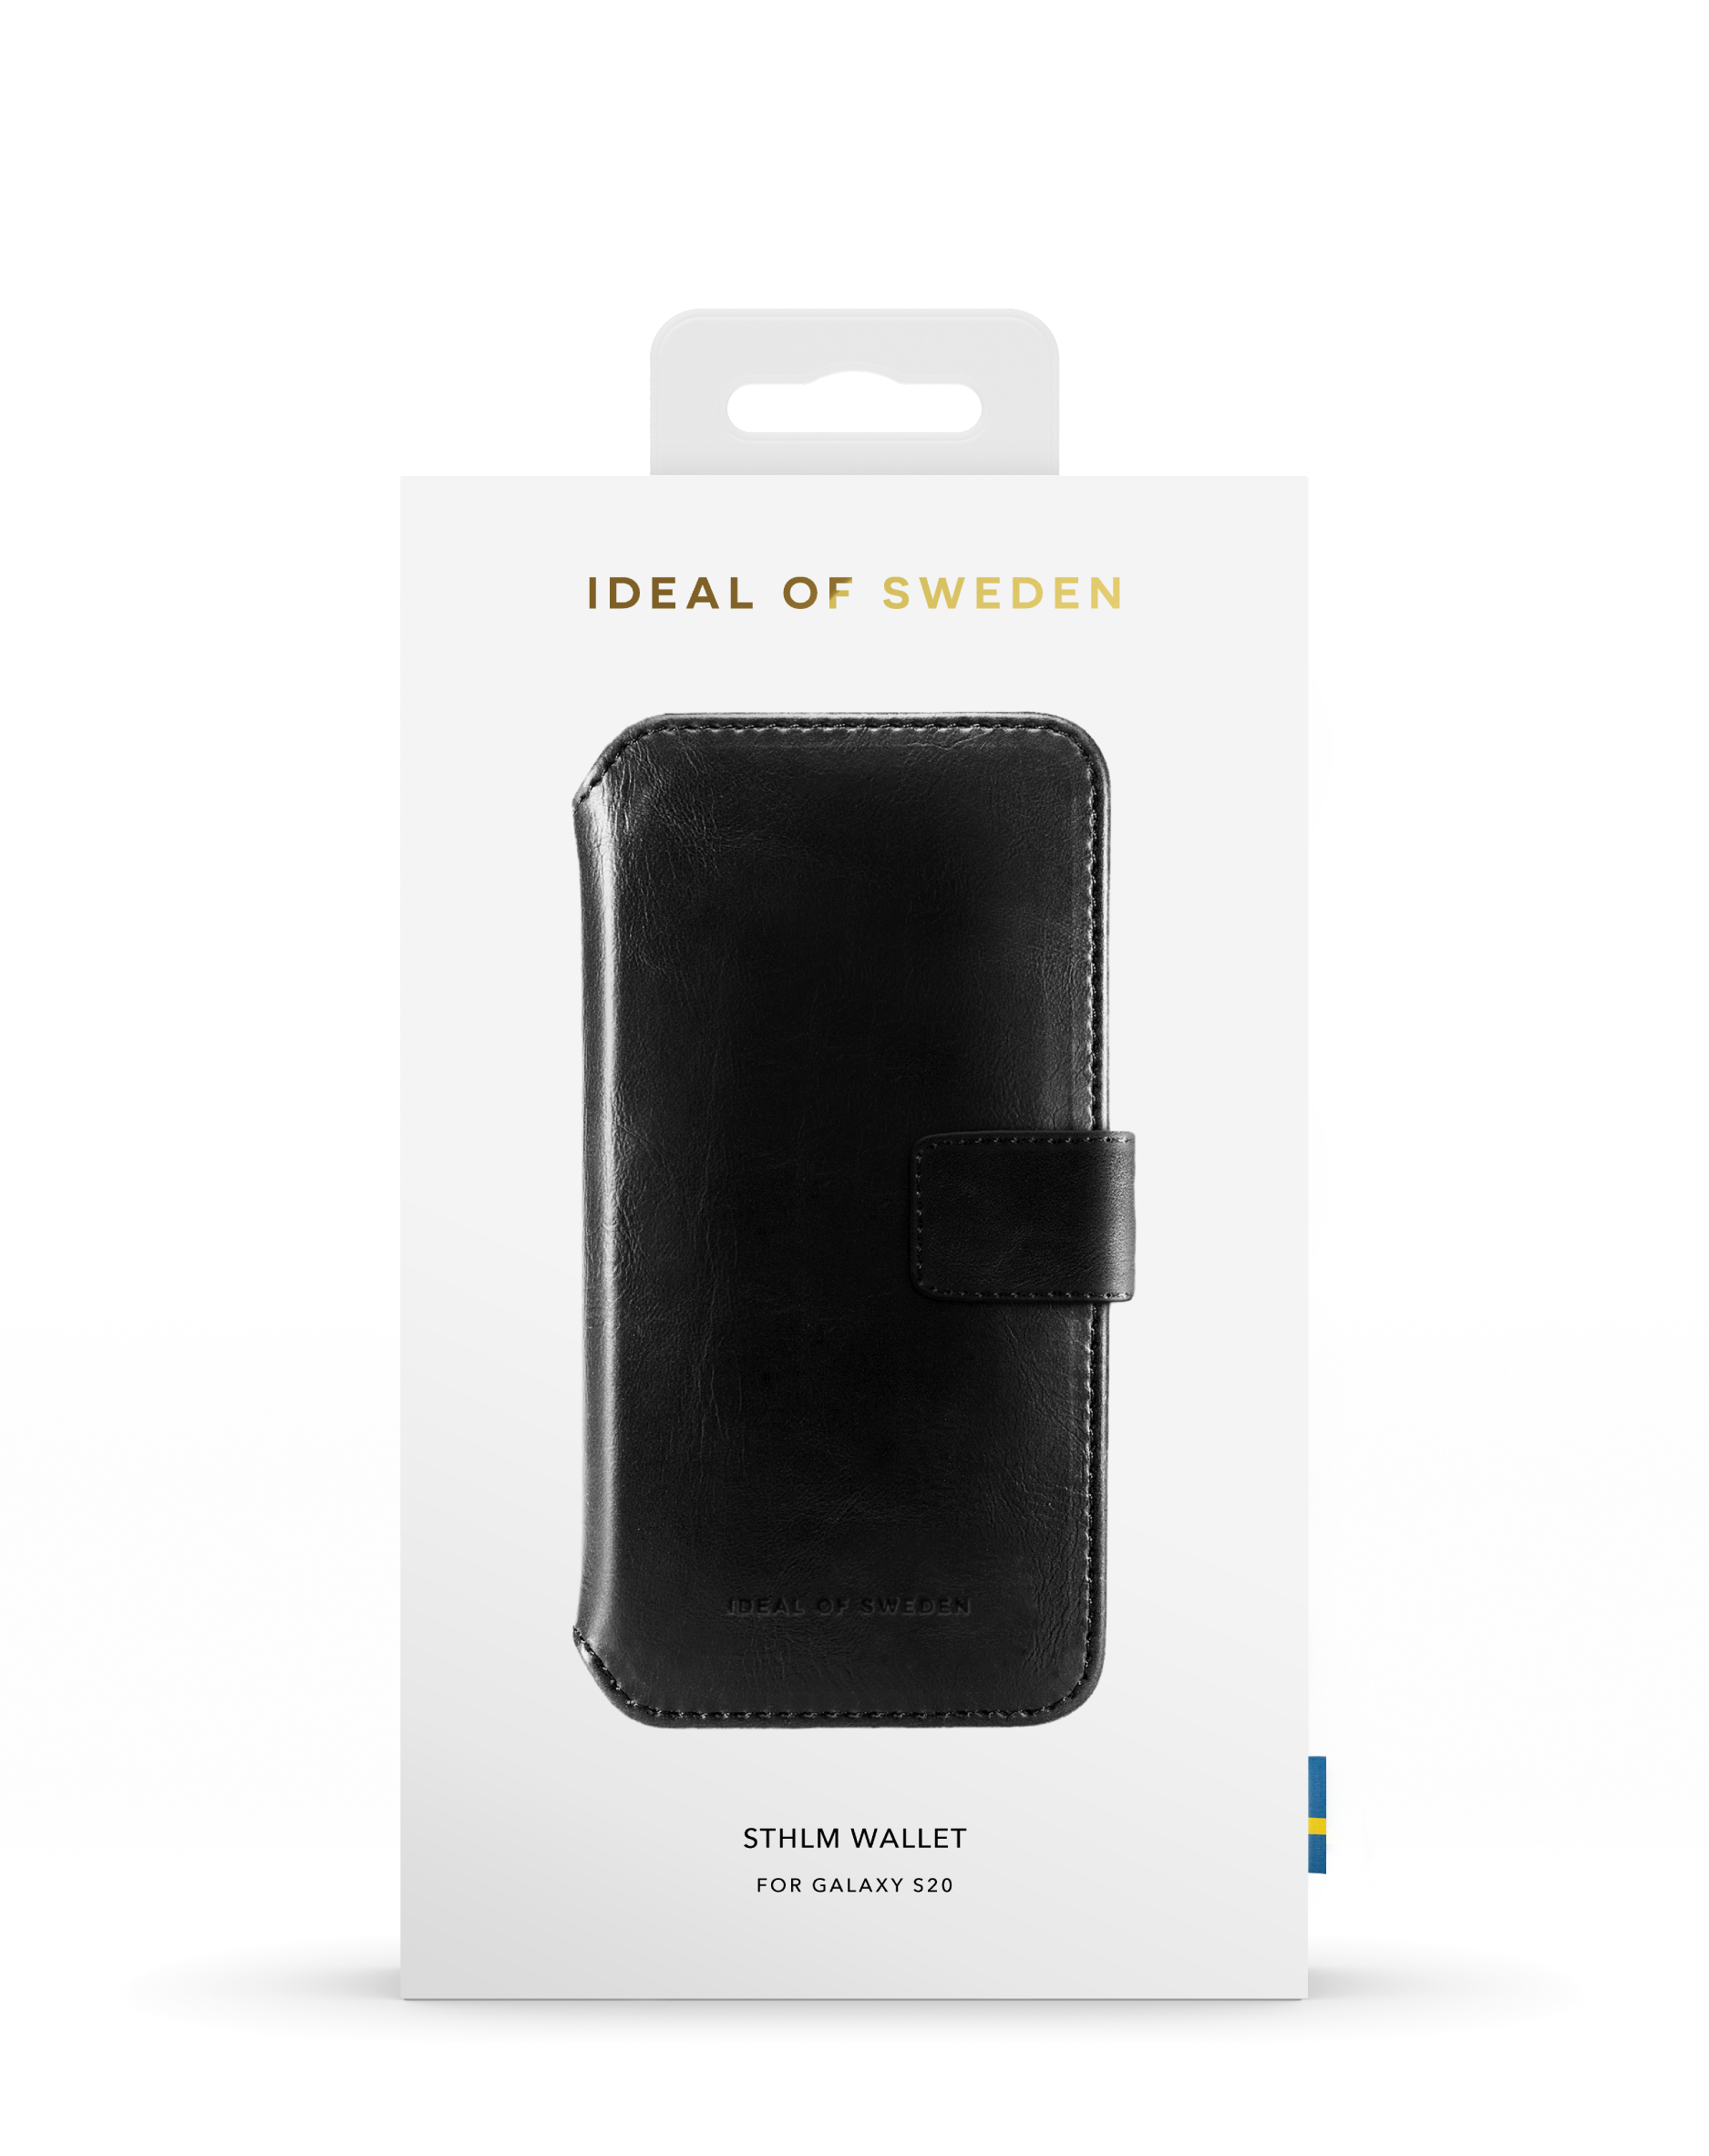 Full Galaxy Ultra, Black Cover, S20 SWEDEN IDEAL IDSTHW-S11P-01, OF Samsung,